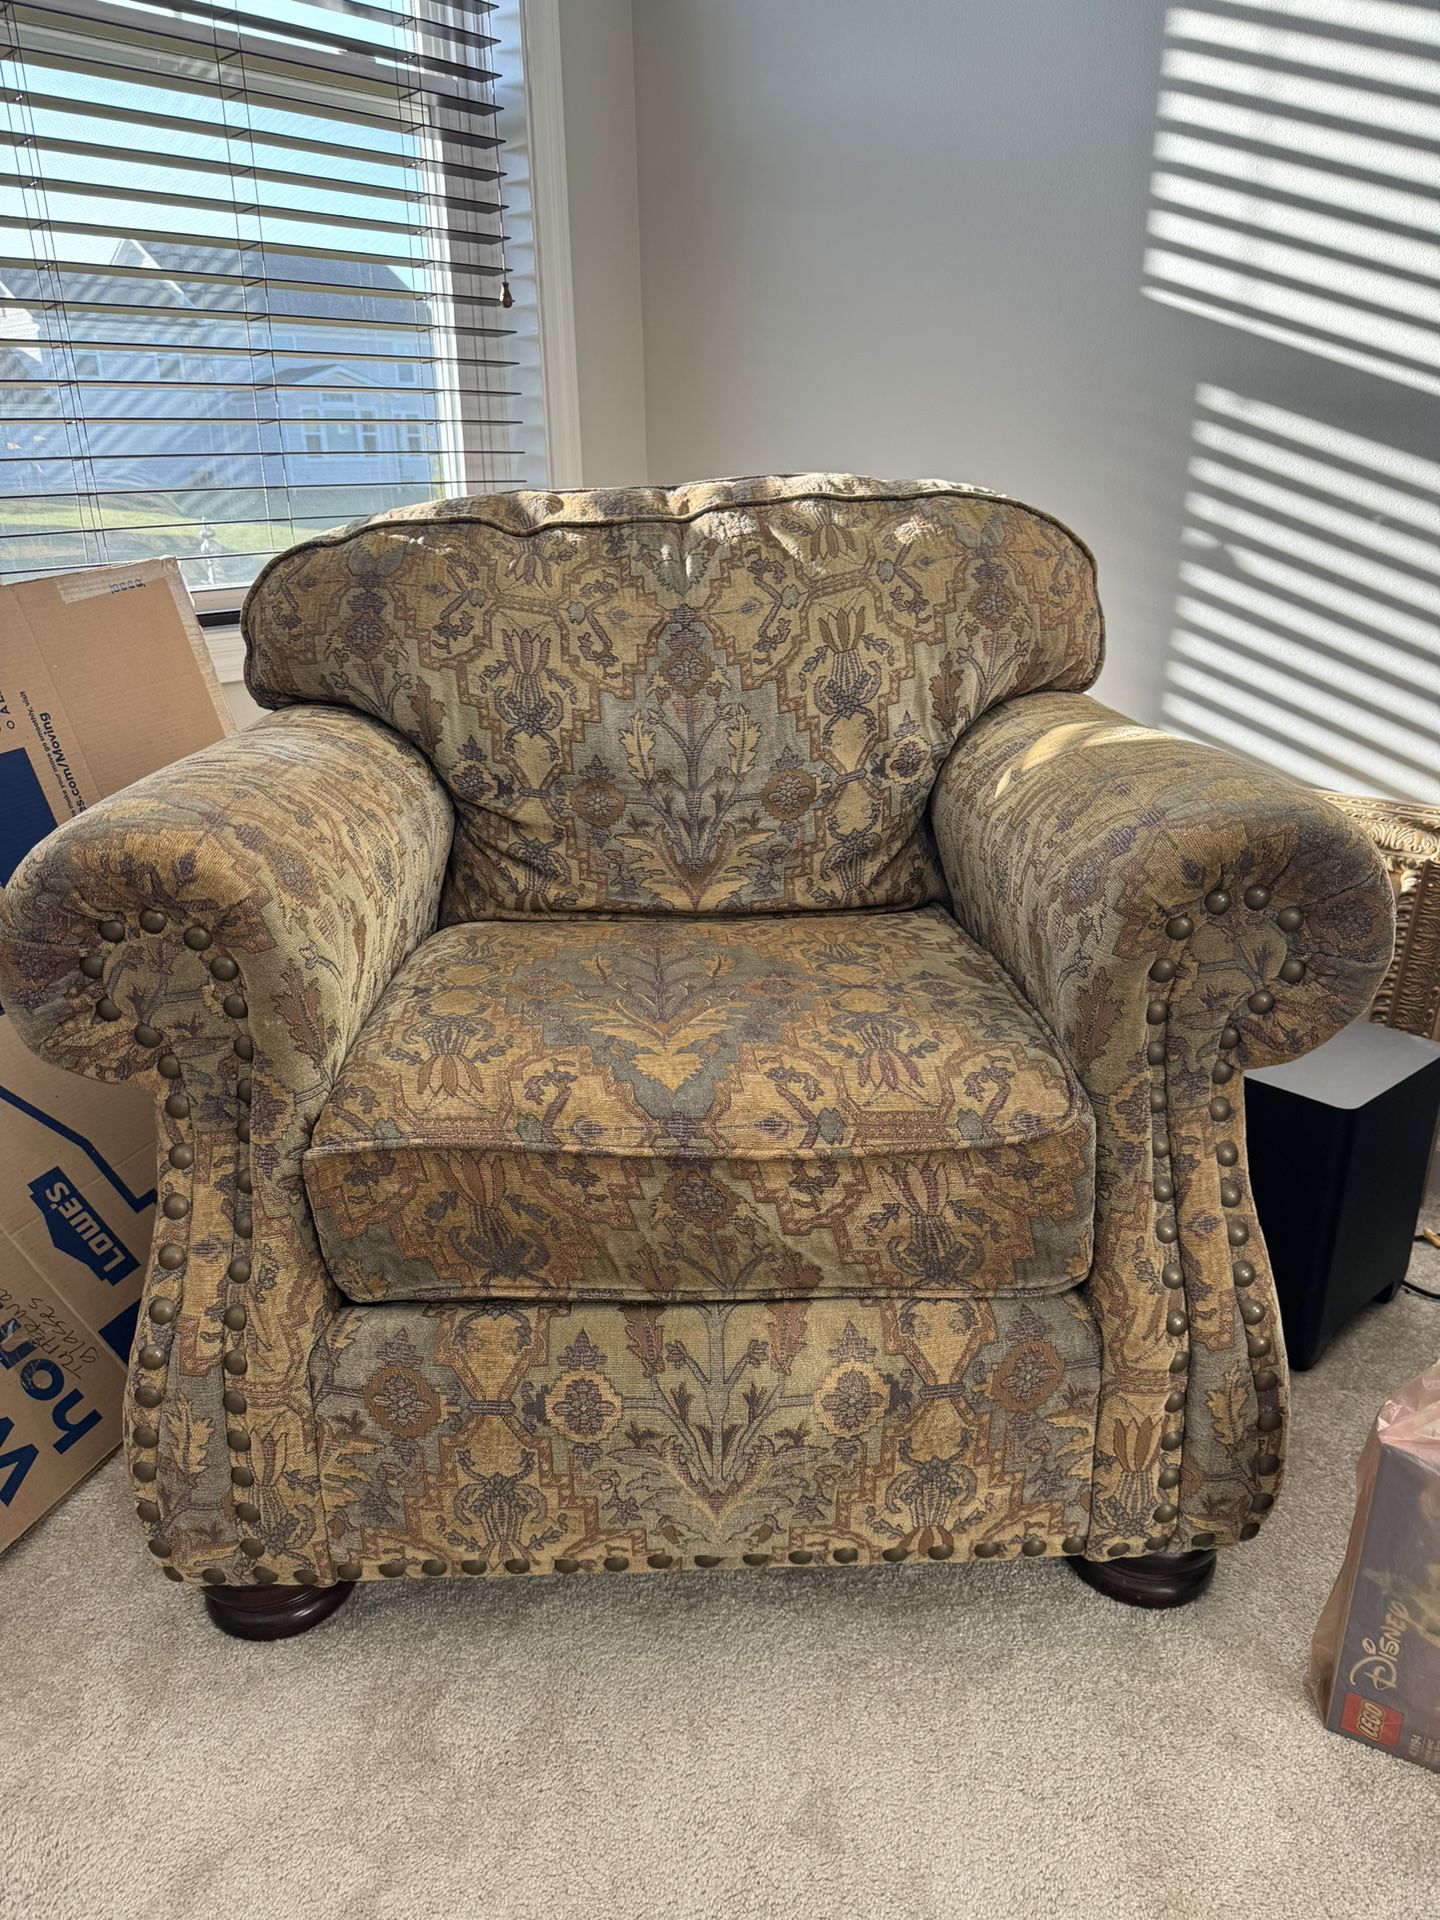 2 Taylor King Chairs with Ottoman